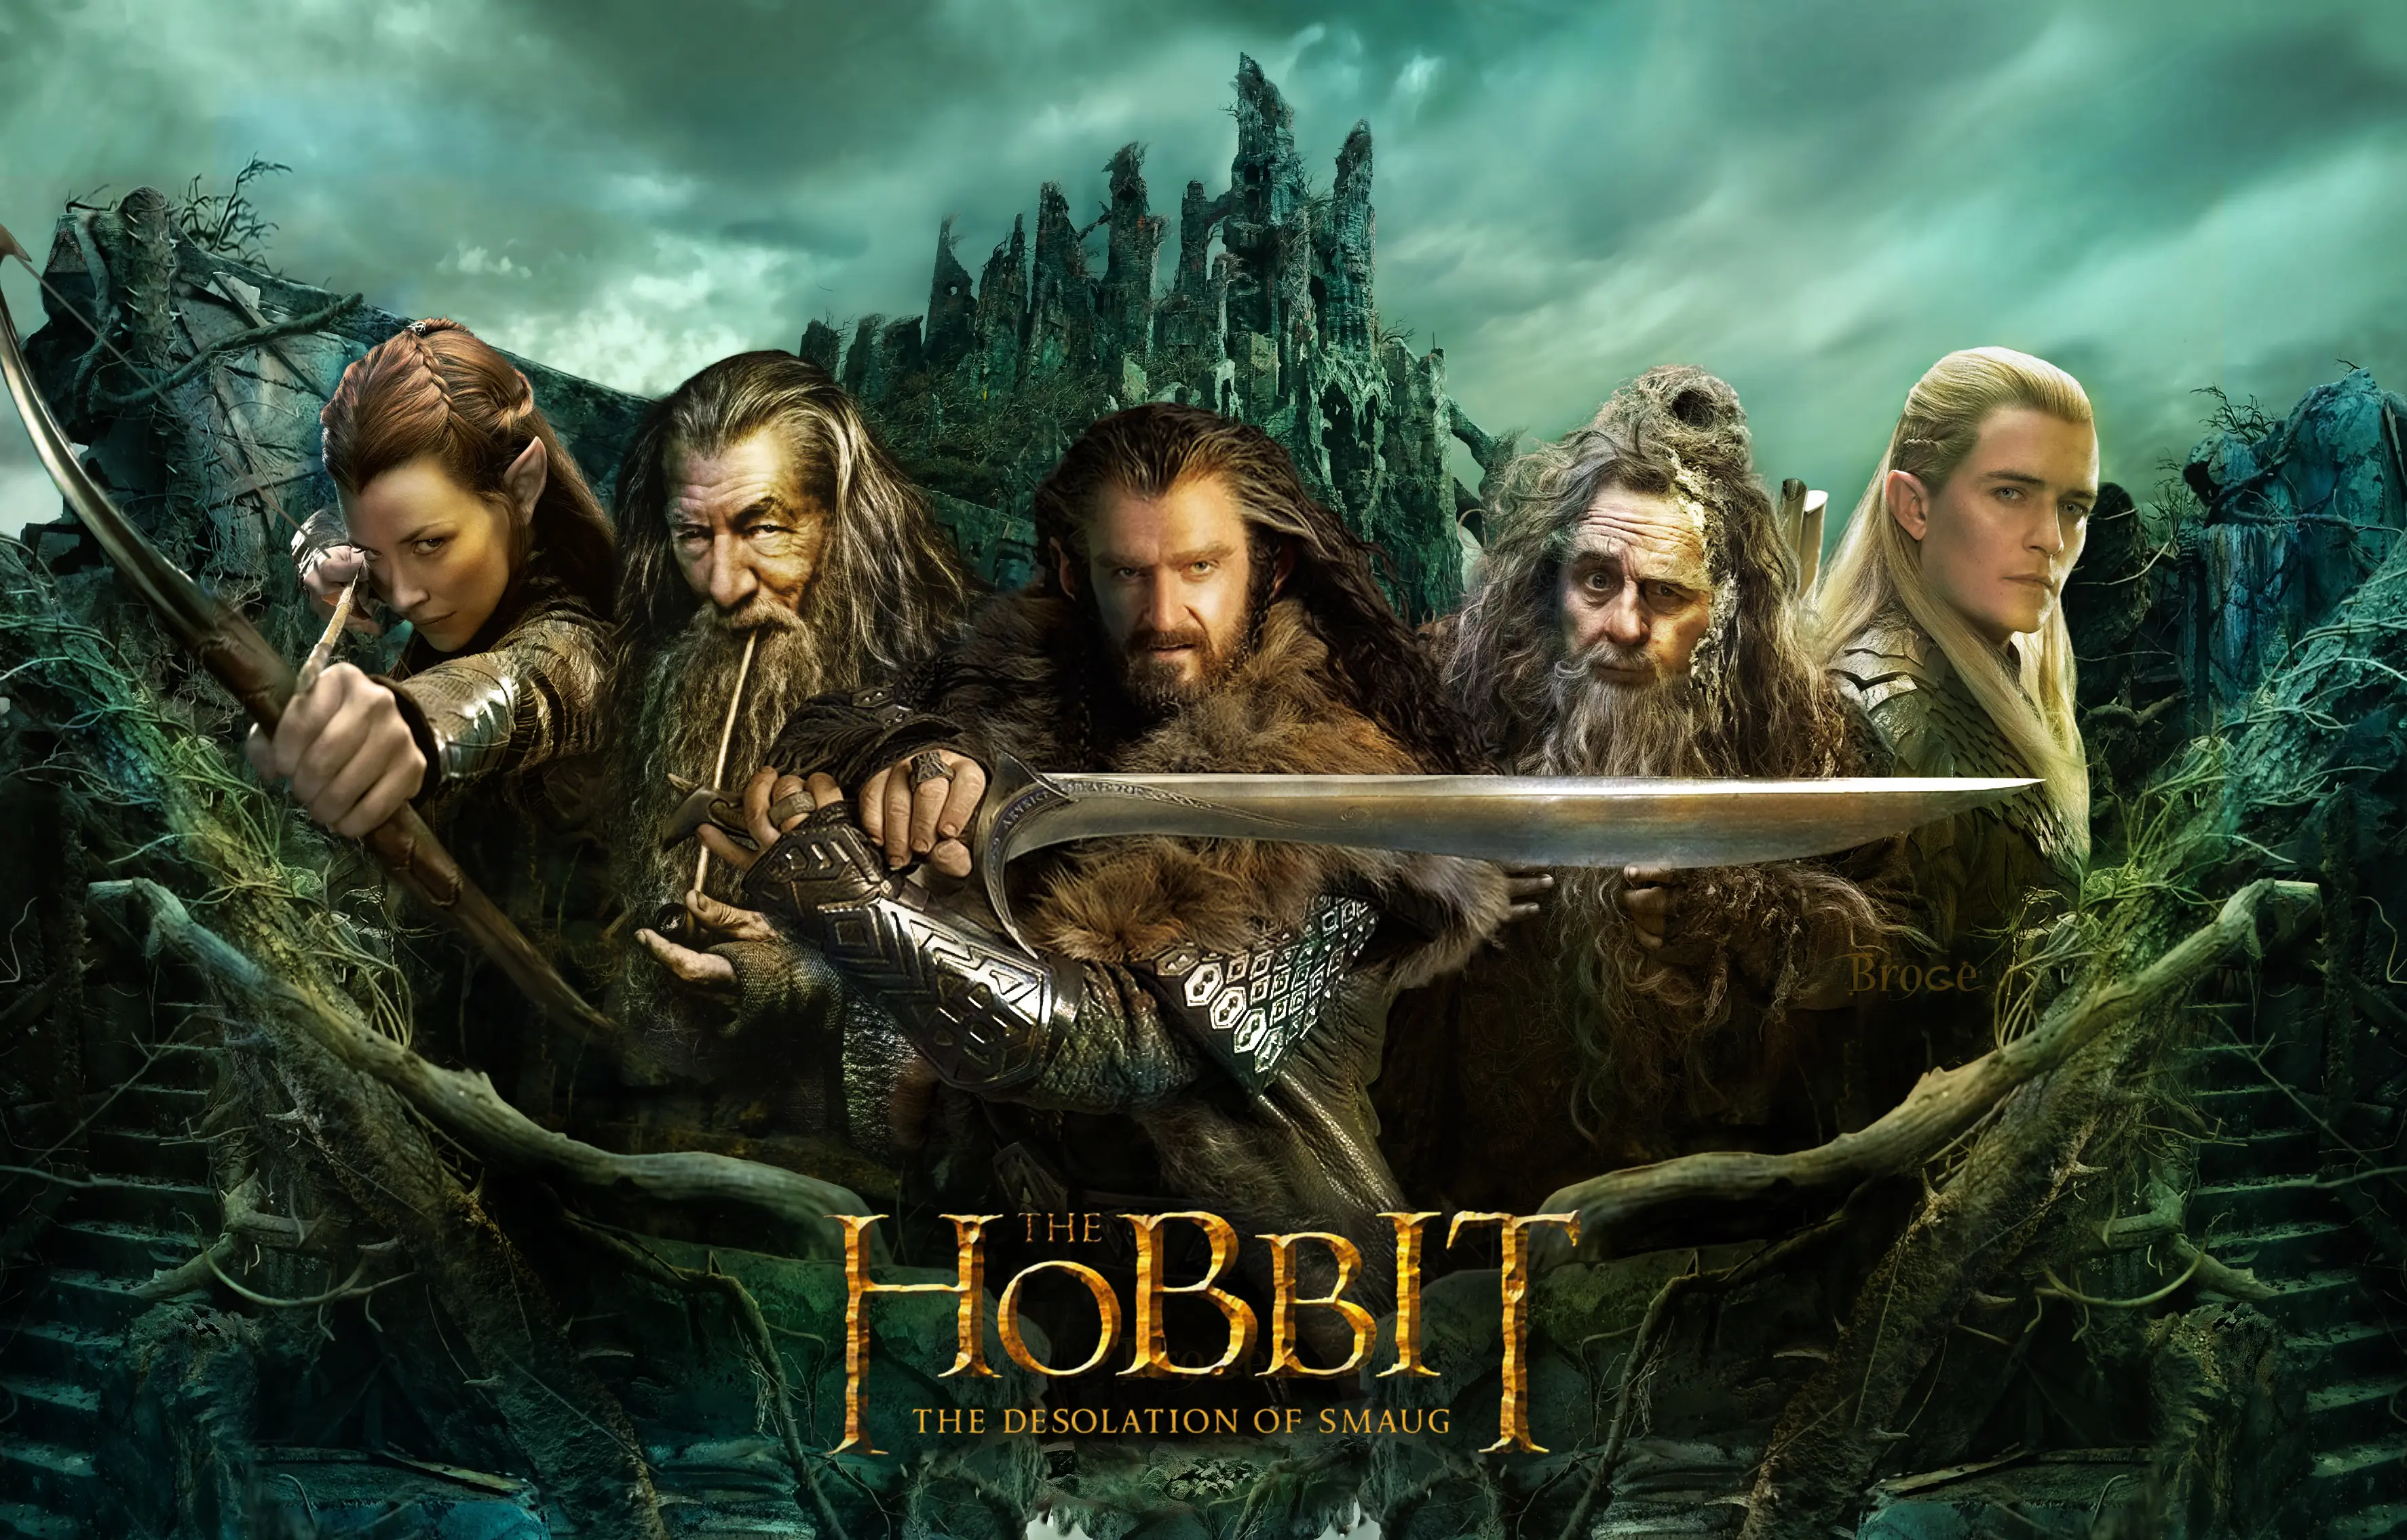 Movie The Hobbit the Desolation of Smaug wallpaper 6 | Background Image